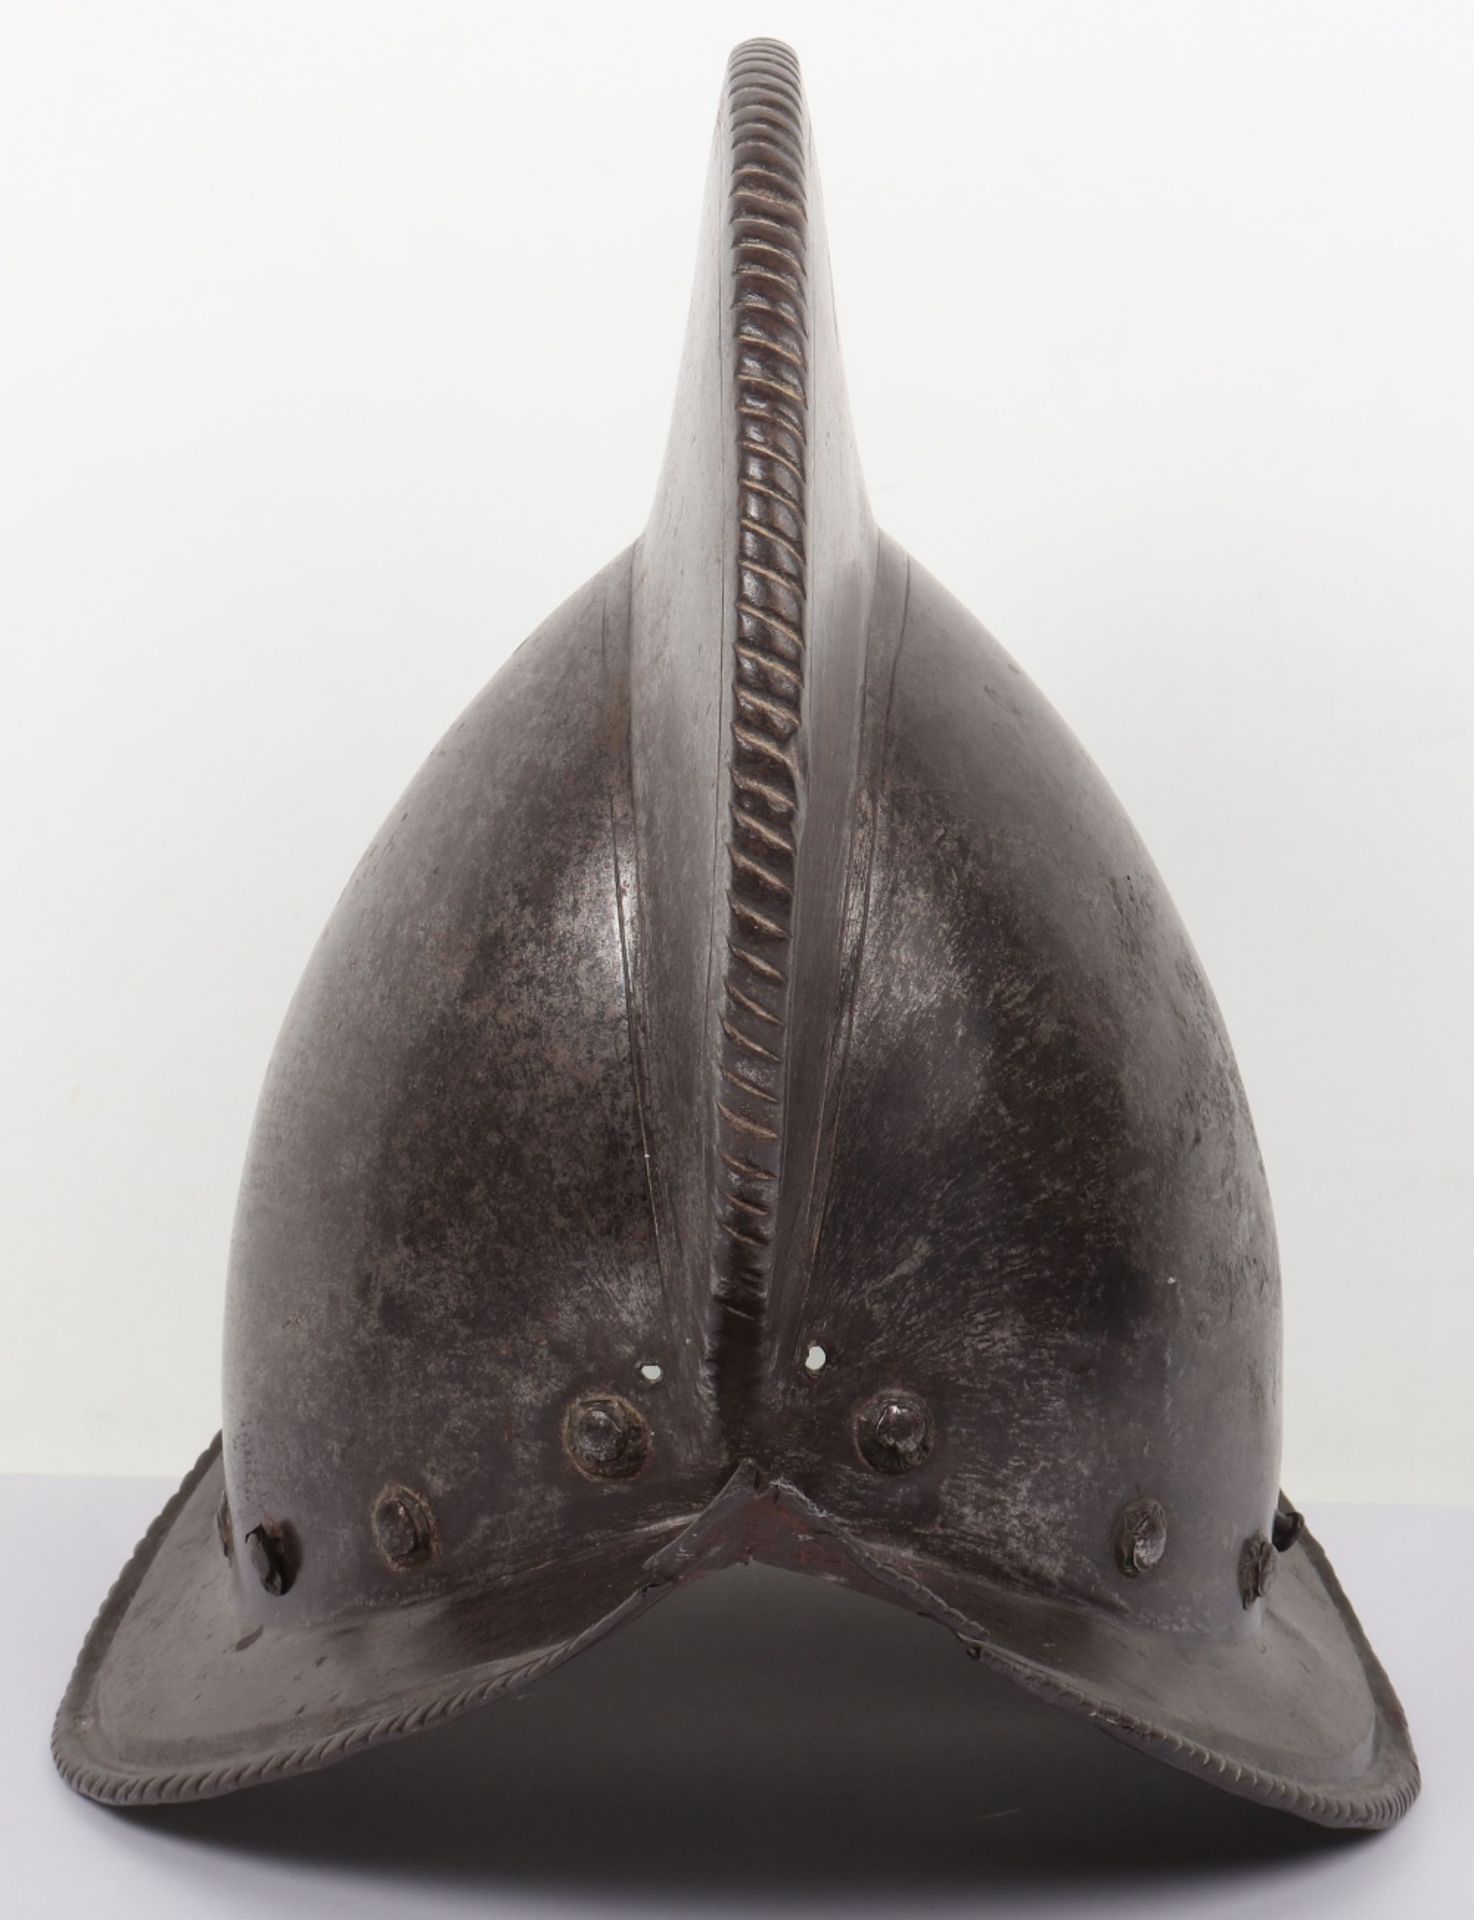 German or Spanish Comb Morion c.1580 - Image 8 of 8